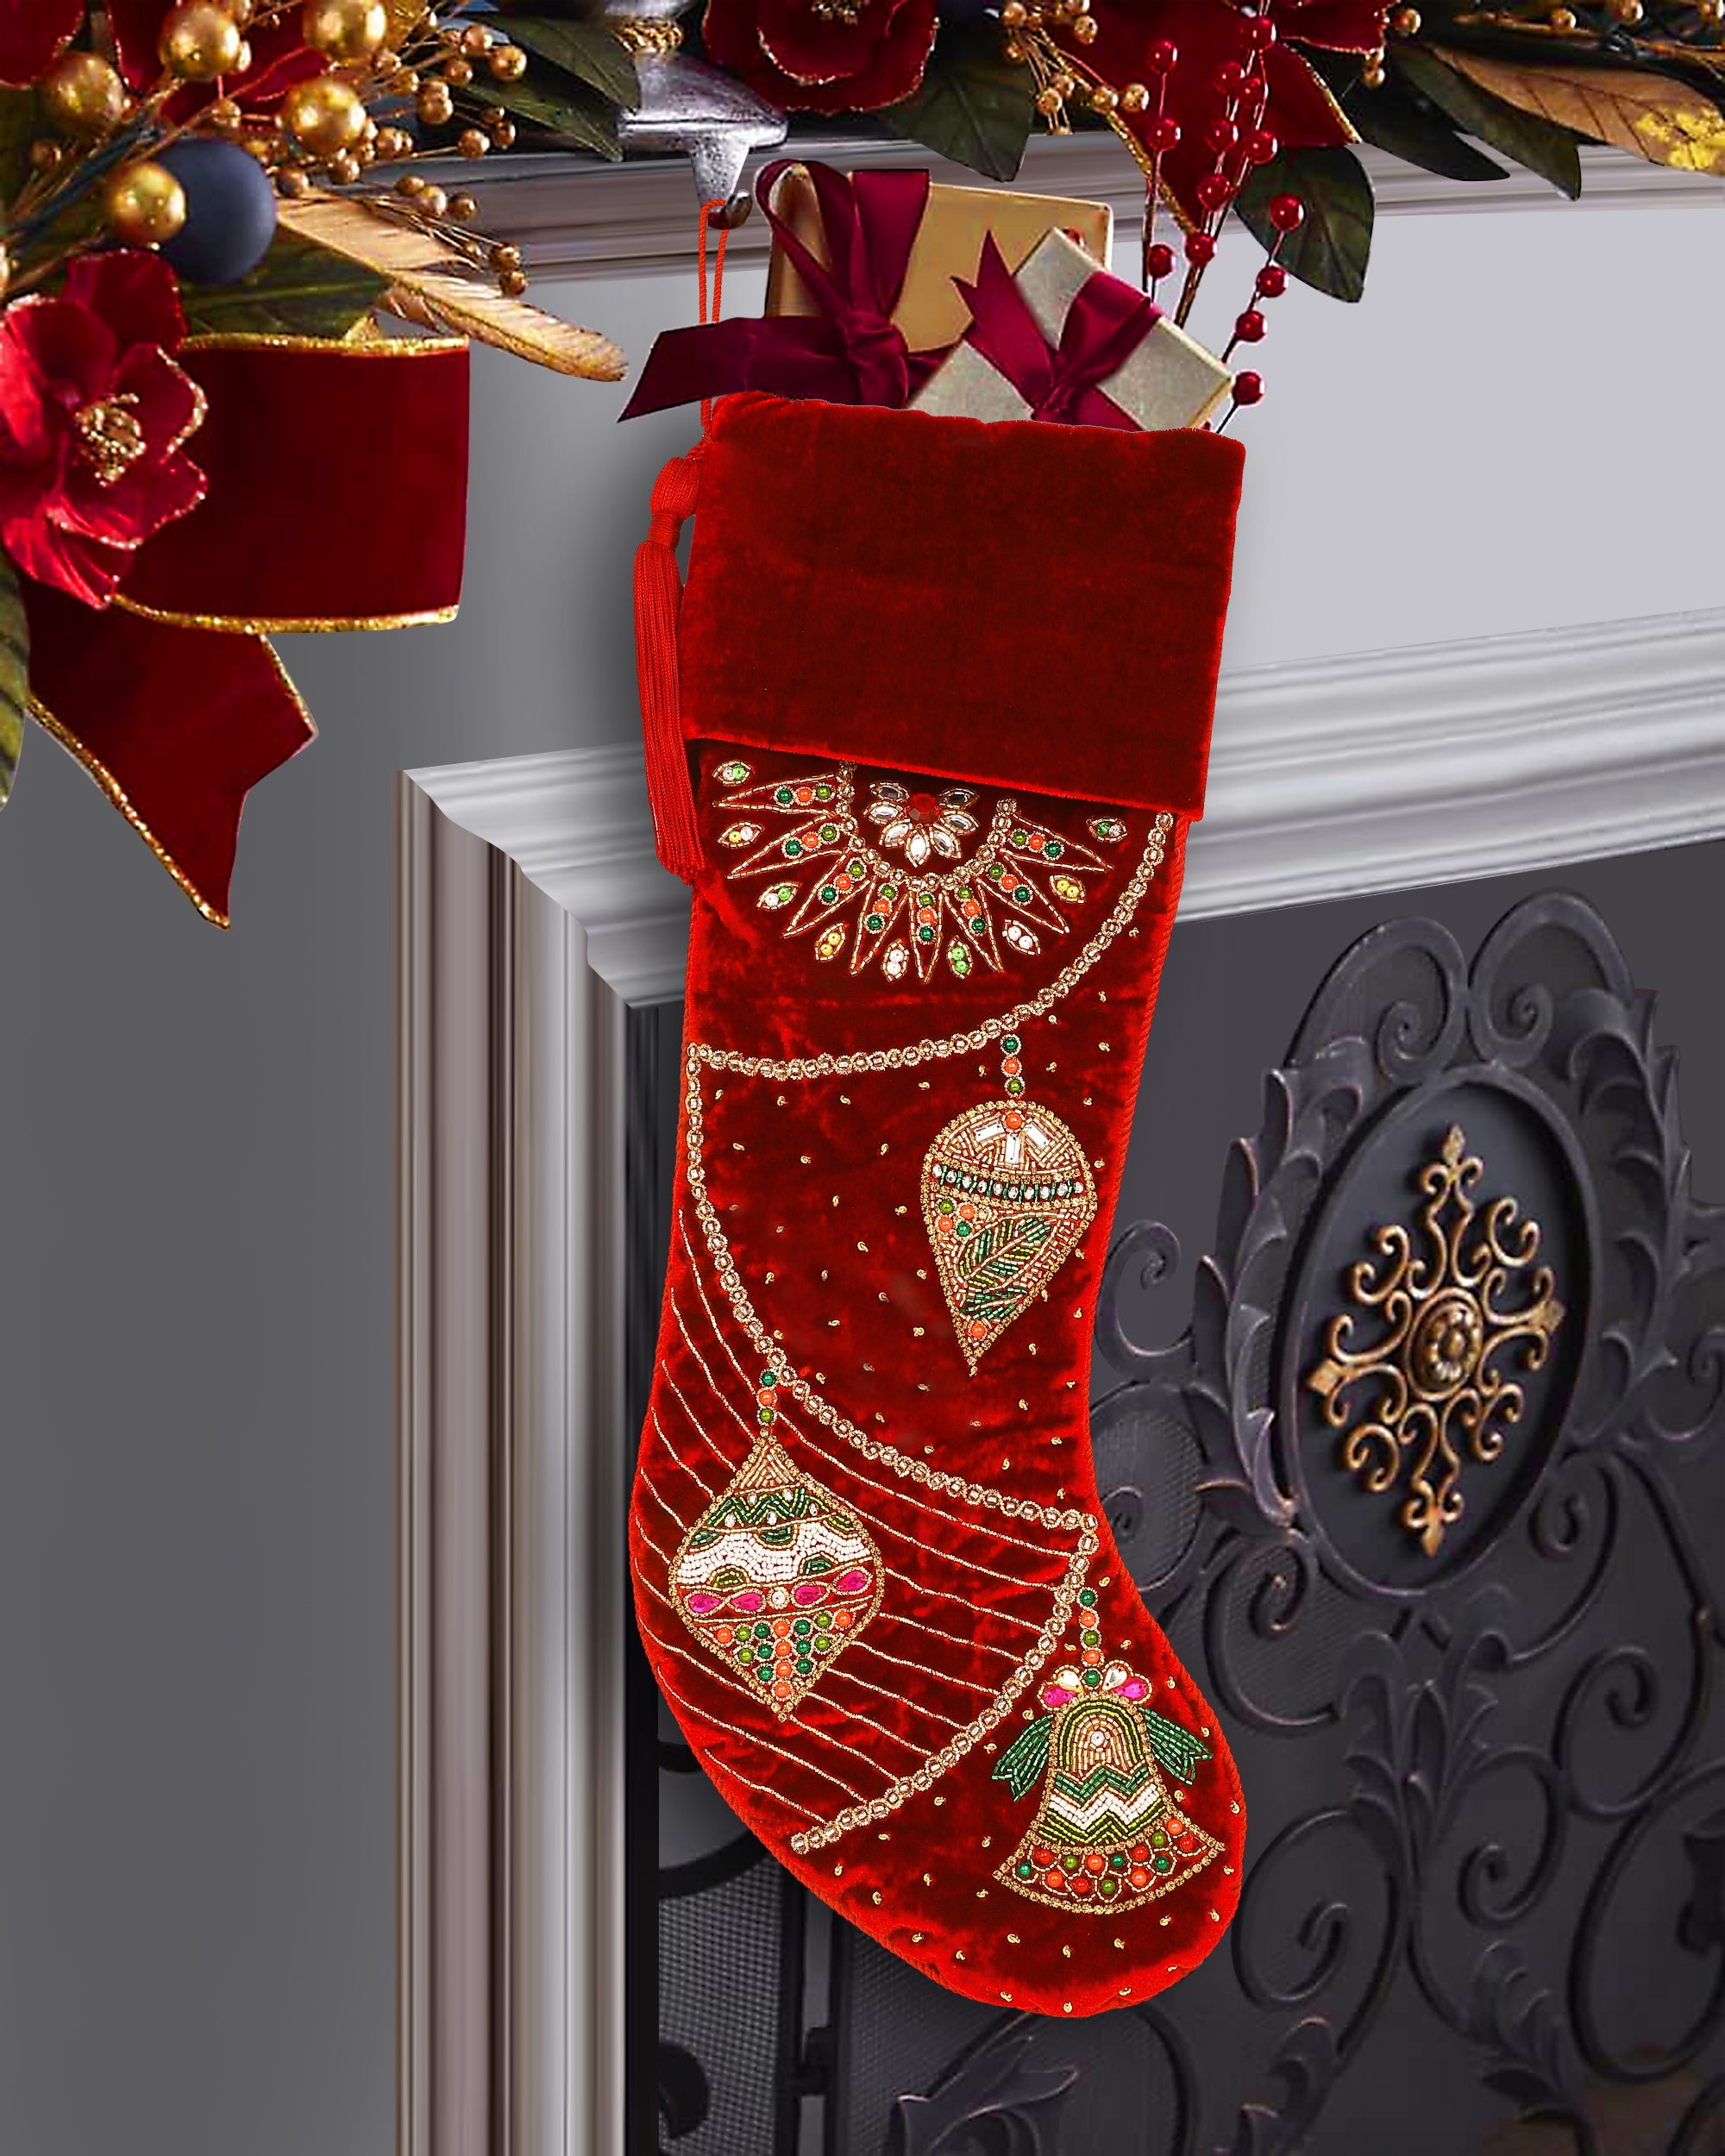 GOLD & RED 4 PIECE CHRISTMAS STOCKING SET